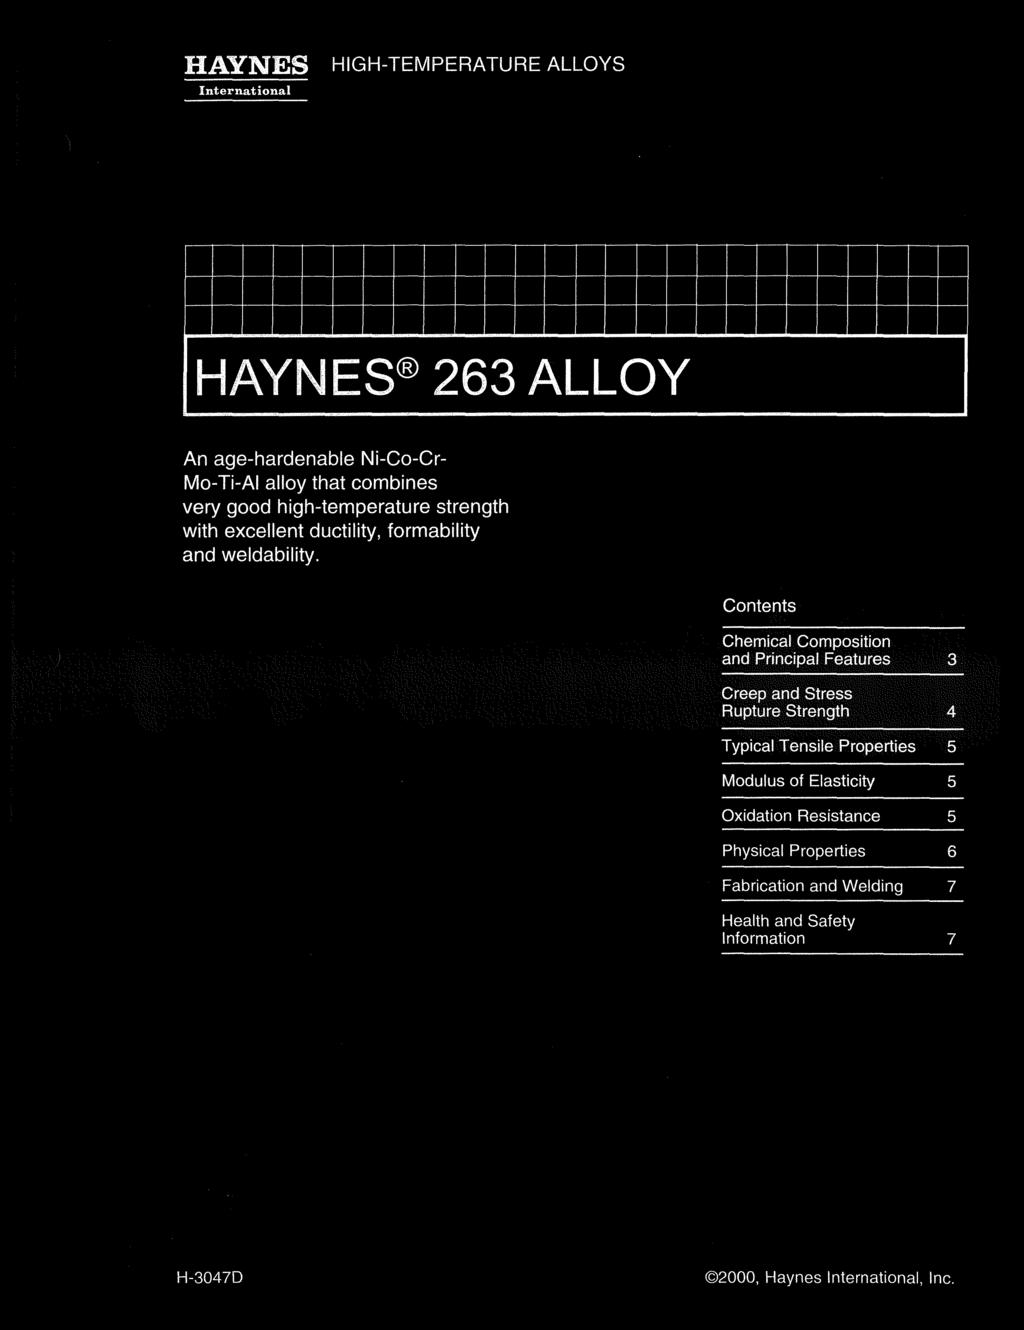 HAYNES international HIGH-TEMPERATURE ALLOYS An age-hardenable Ni-Co-Cr- Mo-Ti-Al alloy that combines very good